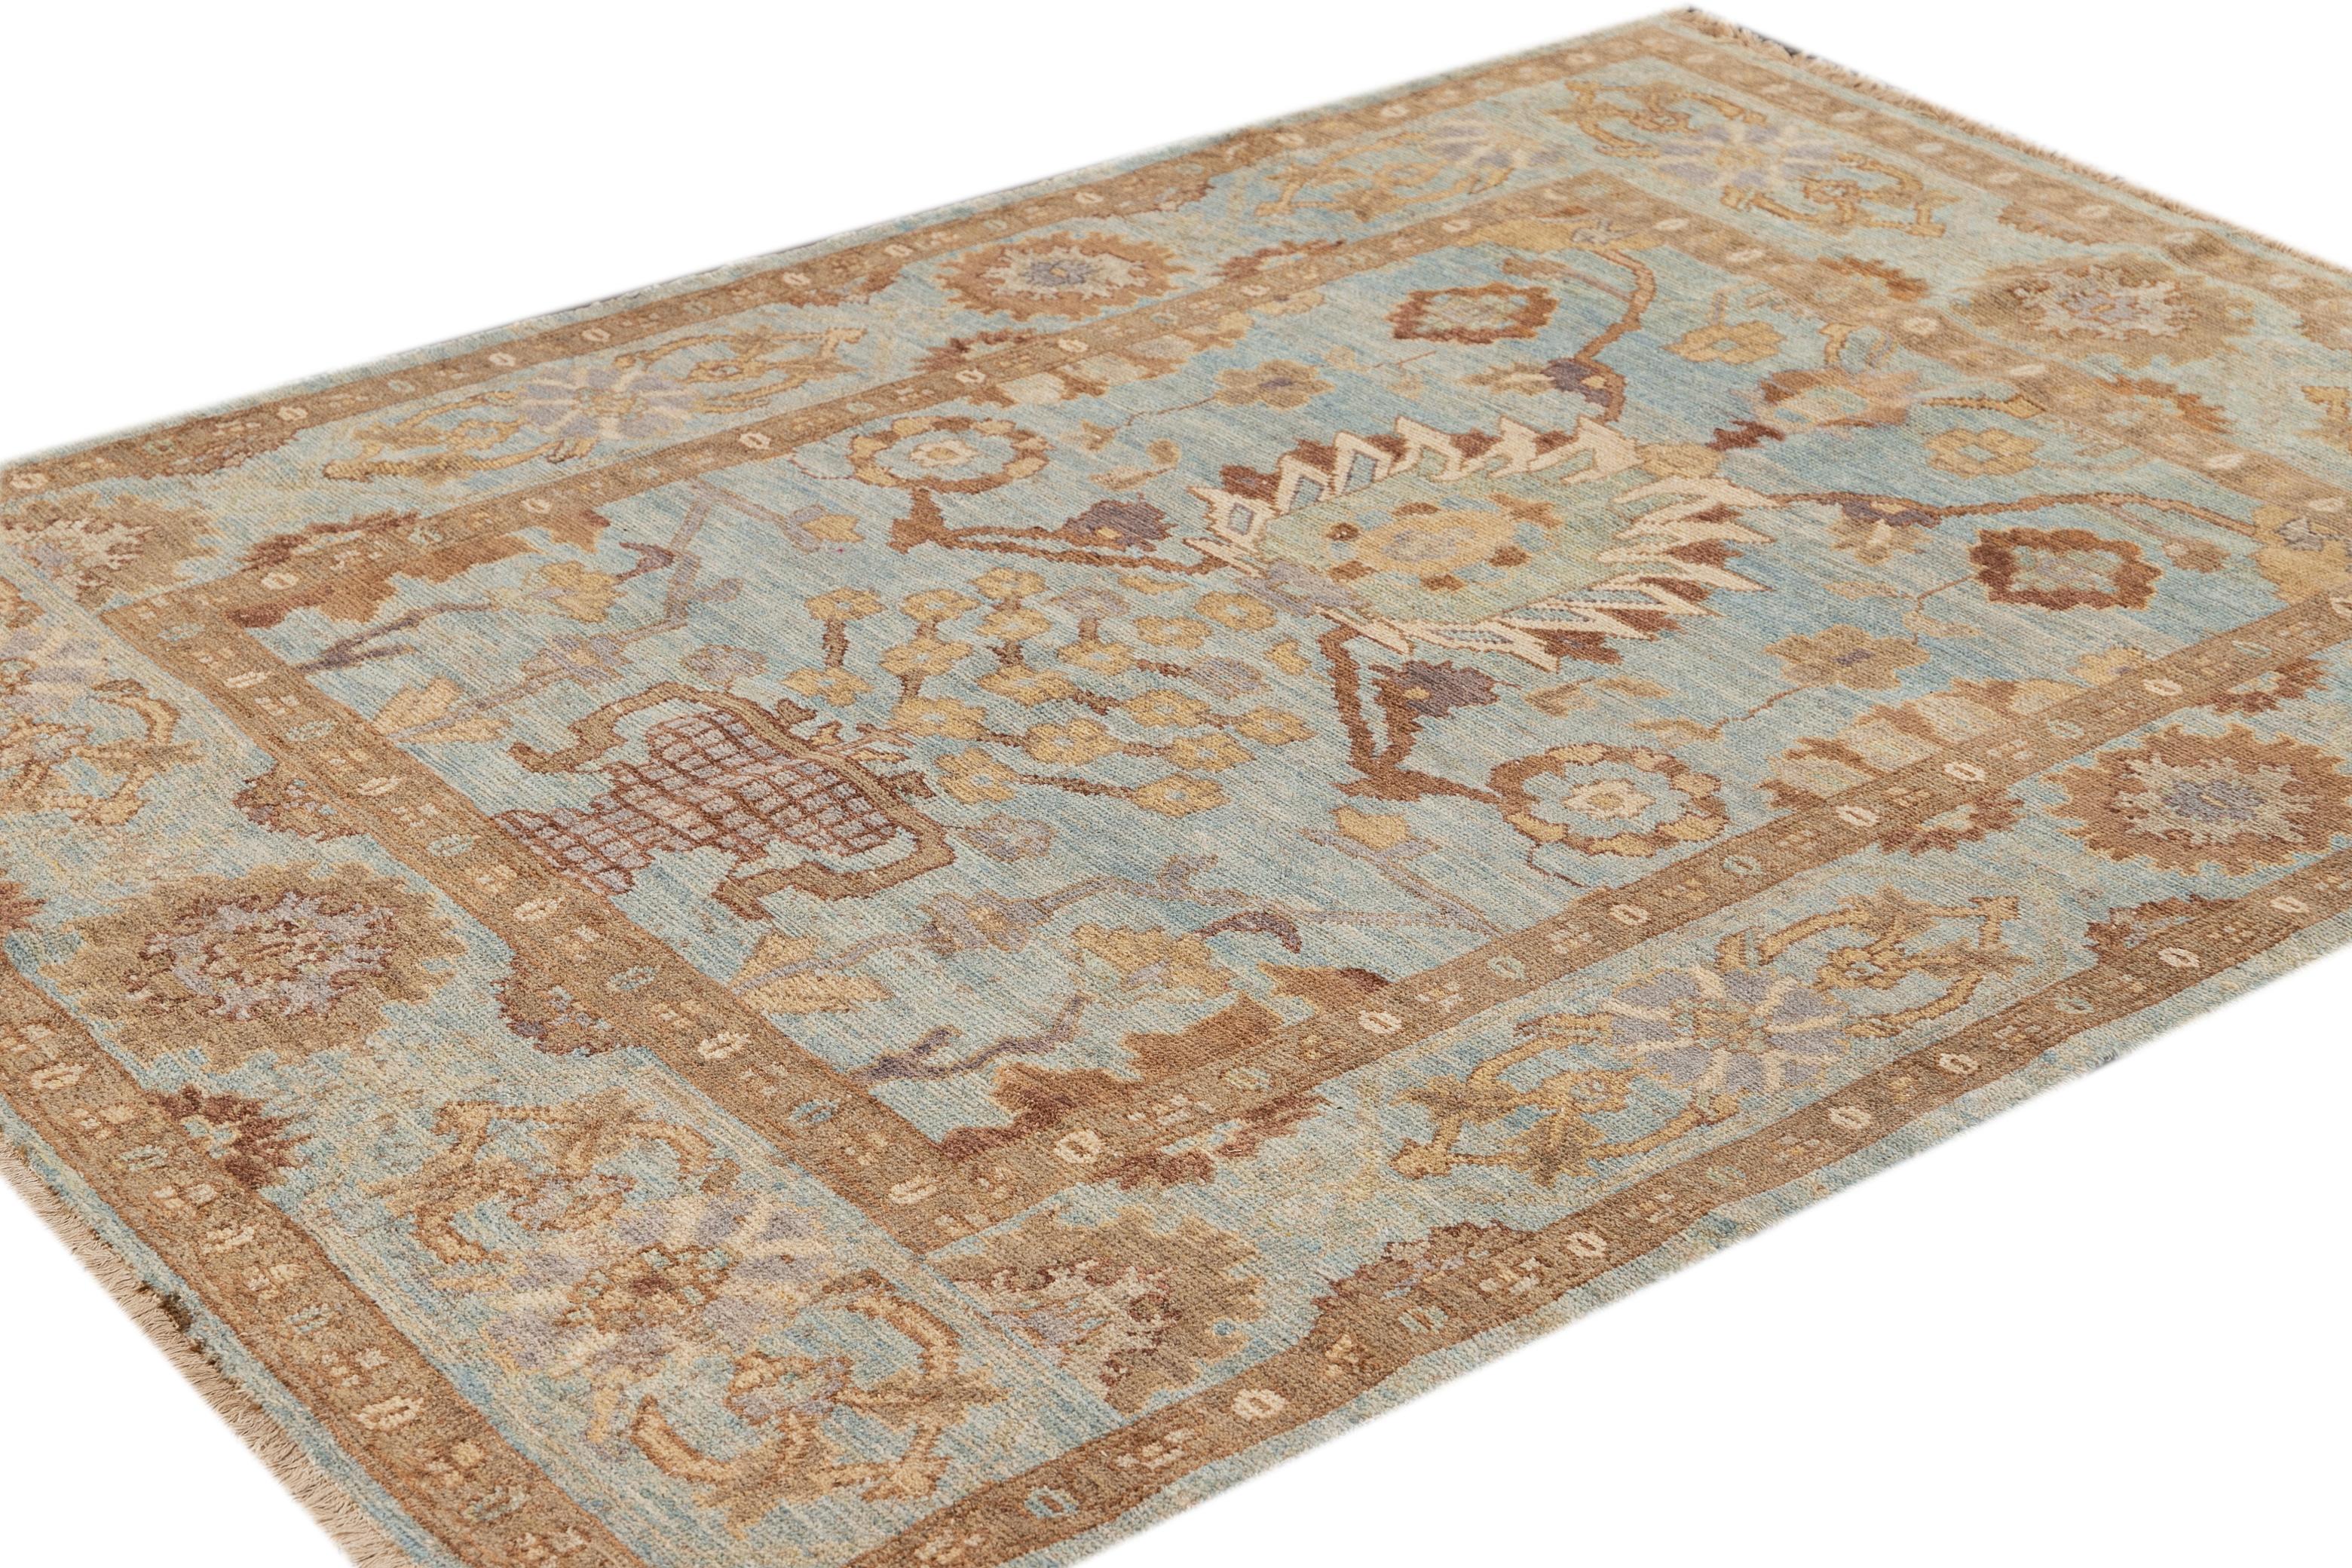 21st Century Modern Square Persian Sultanabad Rug In New Condition For Sale In Norwalk, CT